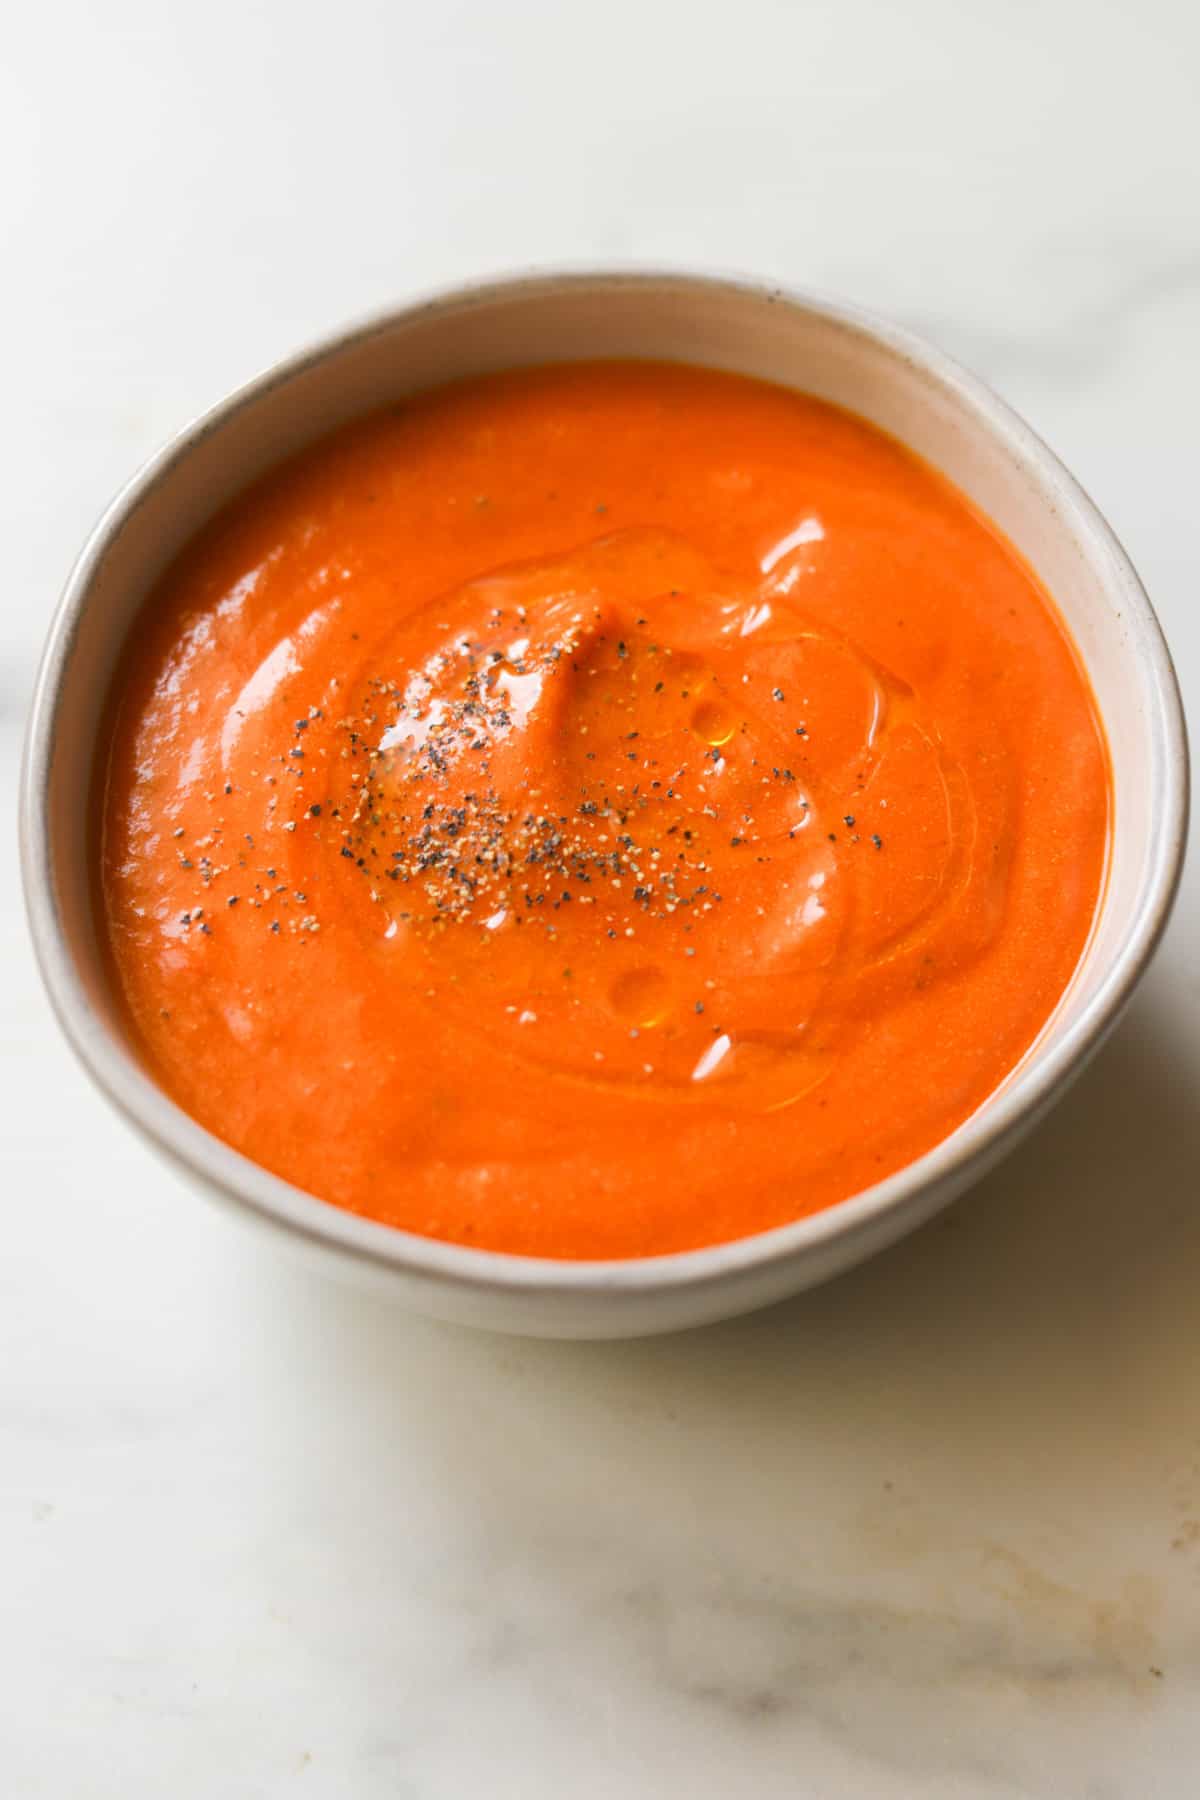 A side angled shot of a bowl of creamy tomato soup with black pepper sprinkled on top.